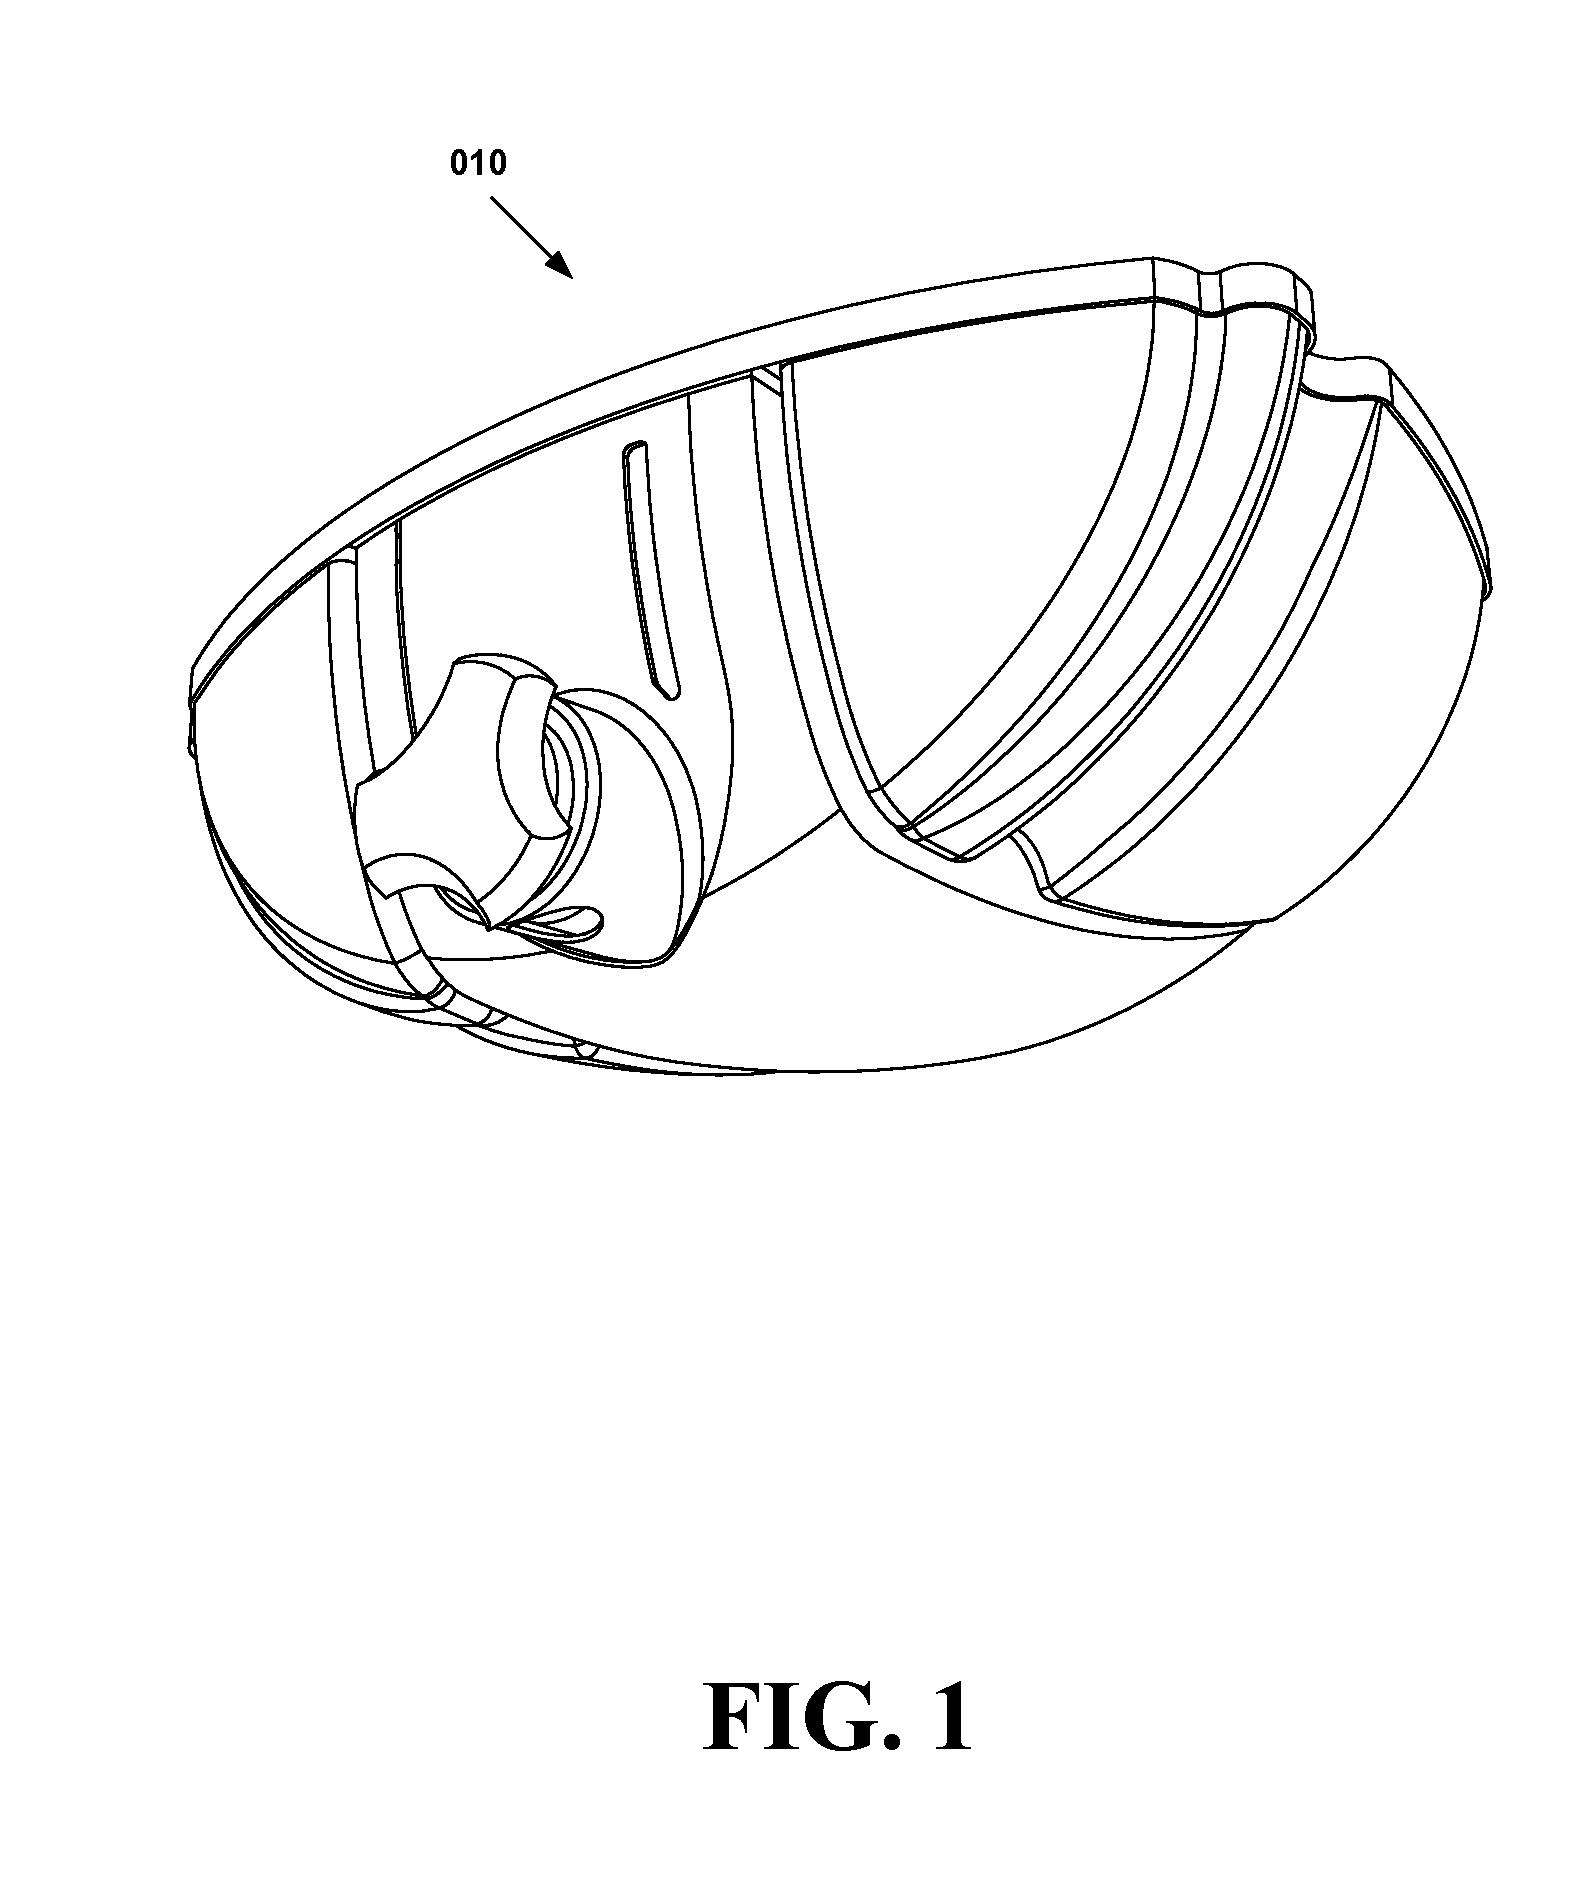 Storage dispenser apparatus for aids, consumables and utensils